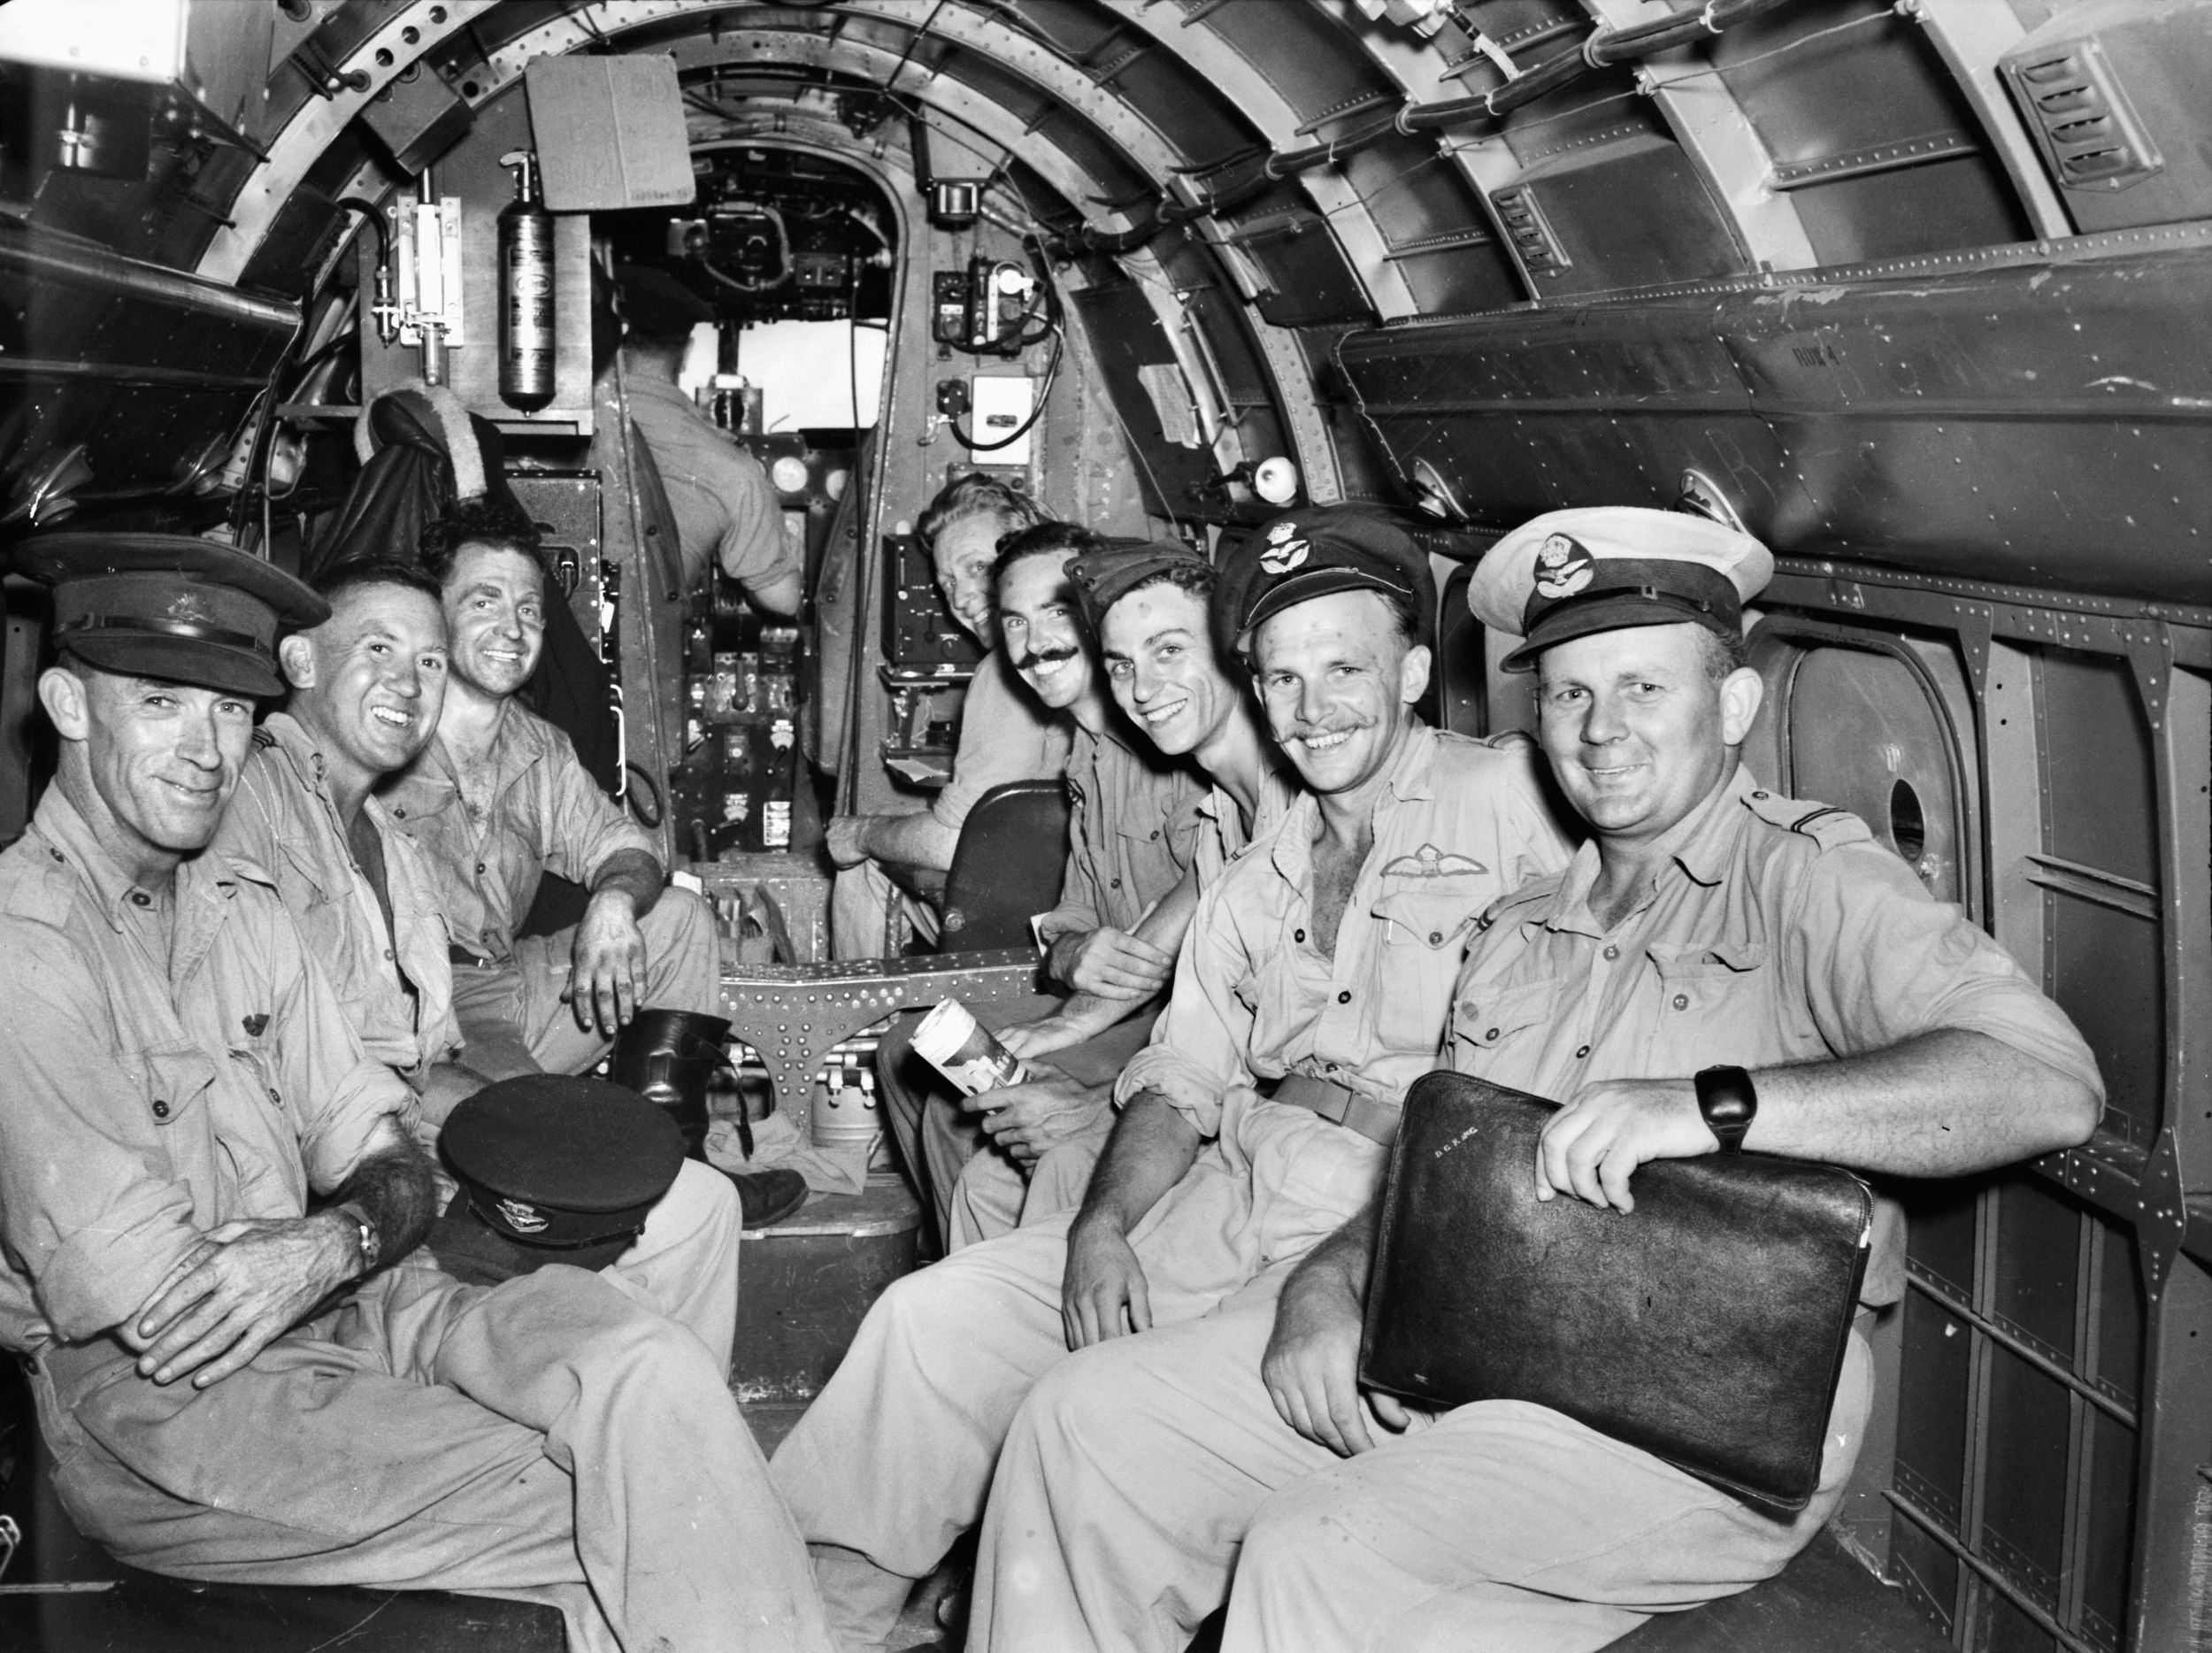 Beaming with delight at the prospect of a deserved rest, a group of RAAF men take their seats in a Lockheed Lodestar of the 37th Squadron on a flight from Noemfoor to Australia.